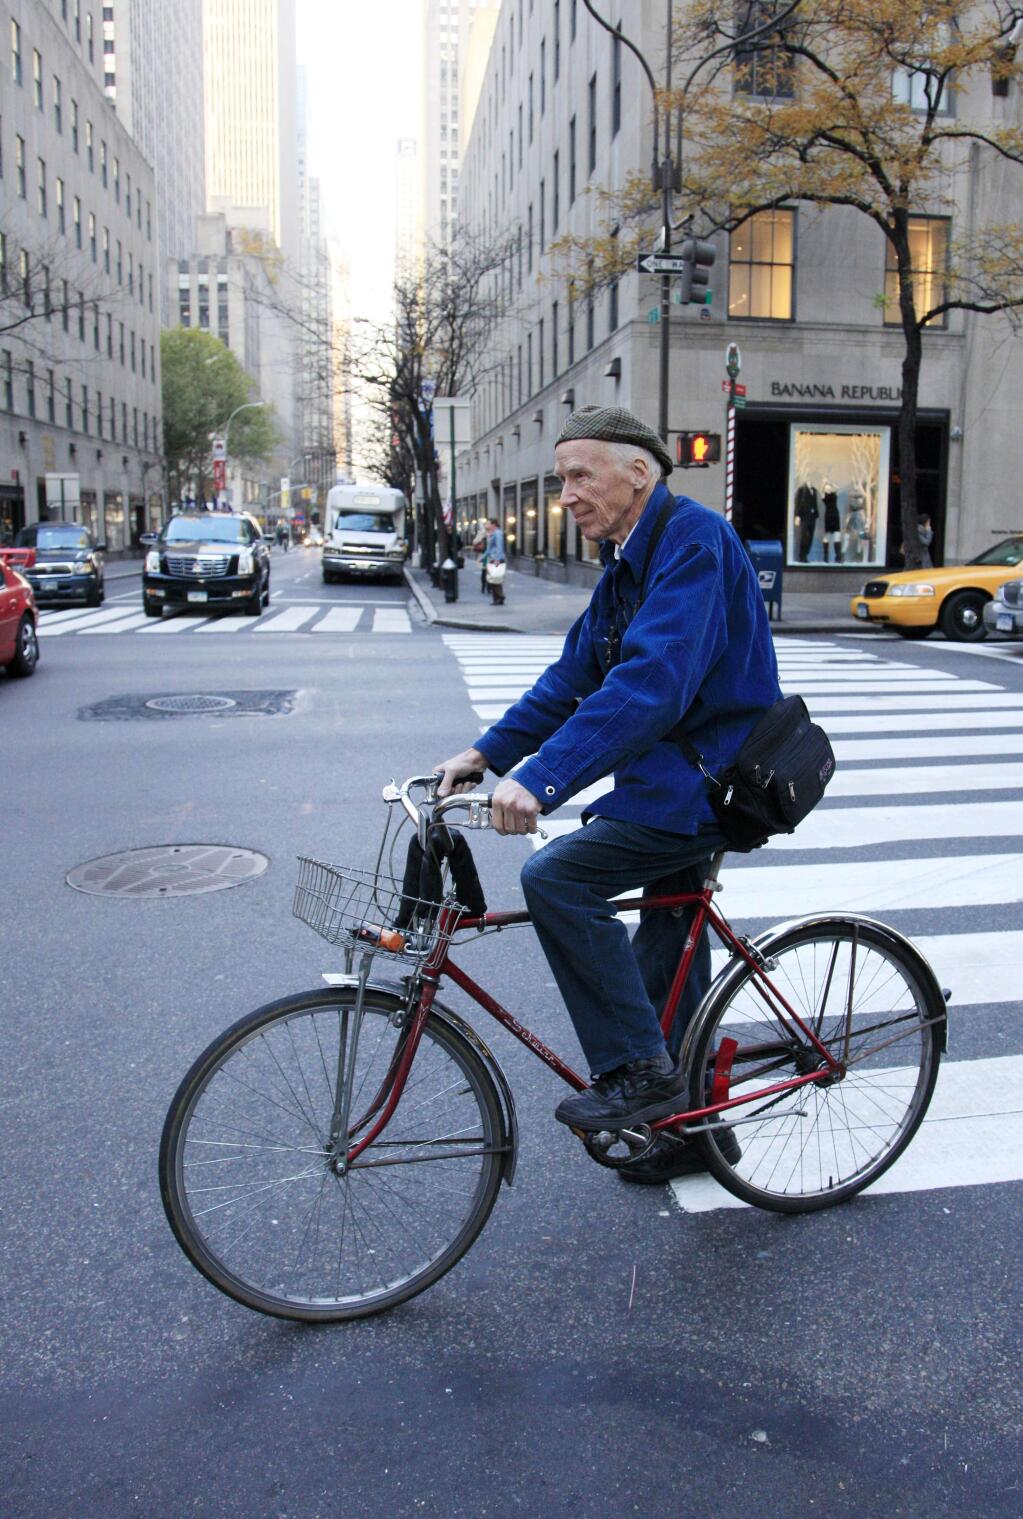 FILE - In this Nov. 23, 2010 file photo, New York Times photographer Bill Cunningham bicycles to work in New York. Cunningham, a longtime fashion photographer for The New York Times known for taking pictures of everyday people on the streets in New York died on Saturday, June 25, 2016, after suffering a stroke in New York. He was 87. (AP Photo/Mark Lennihan, File)